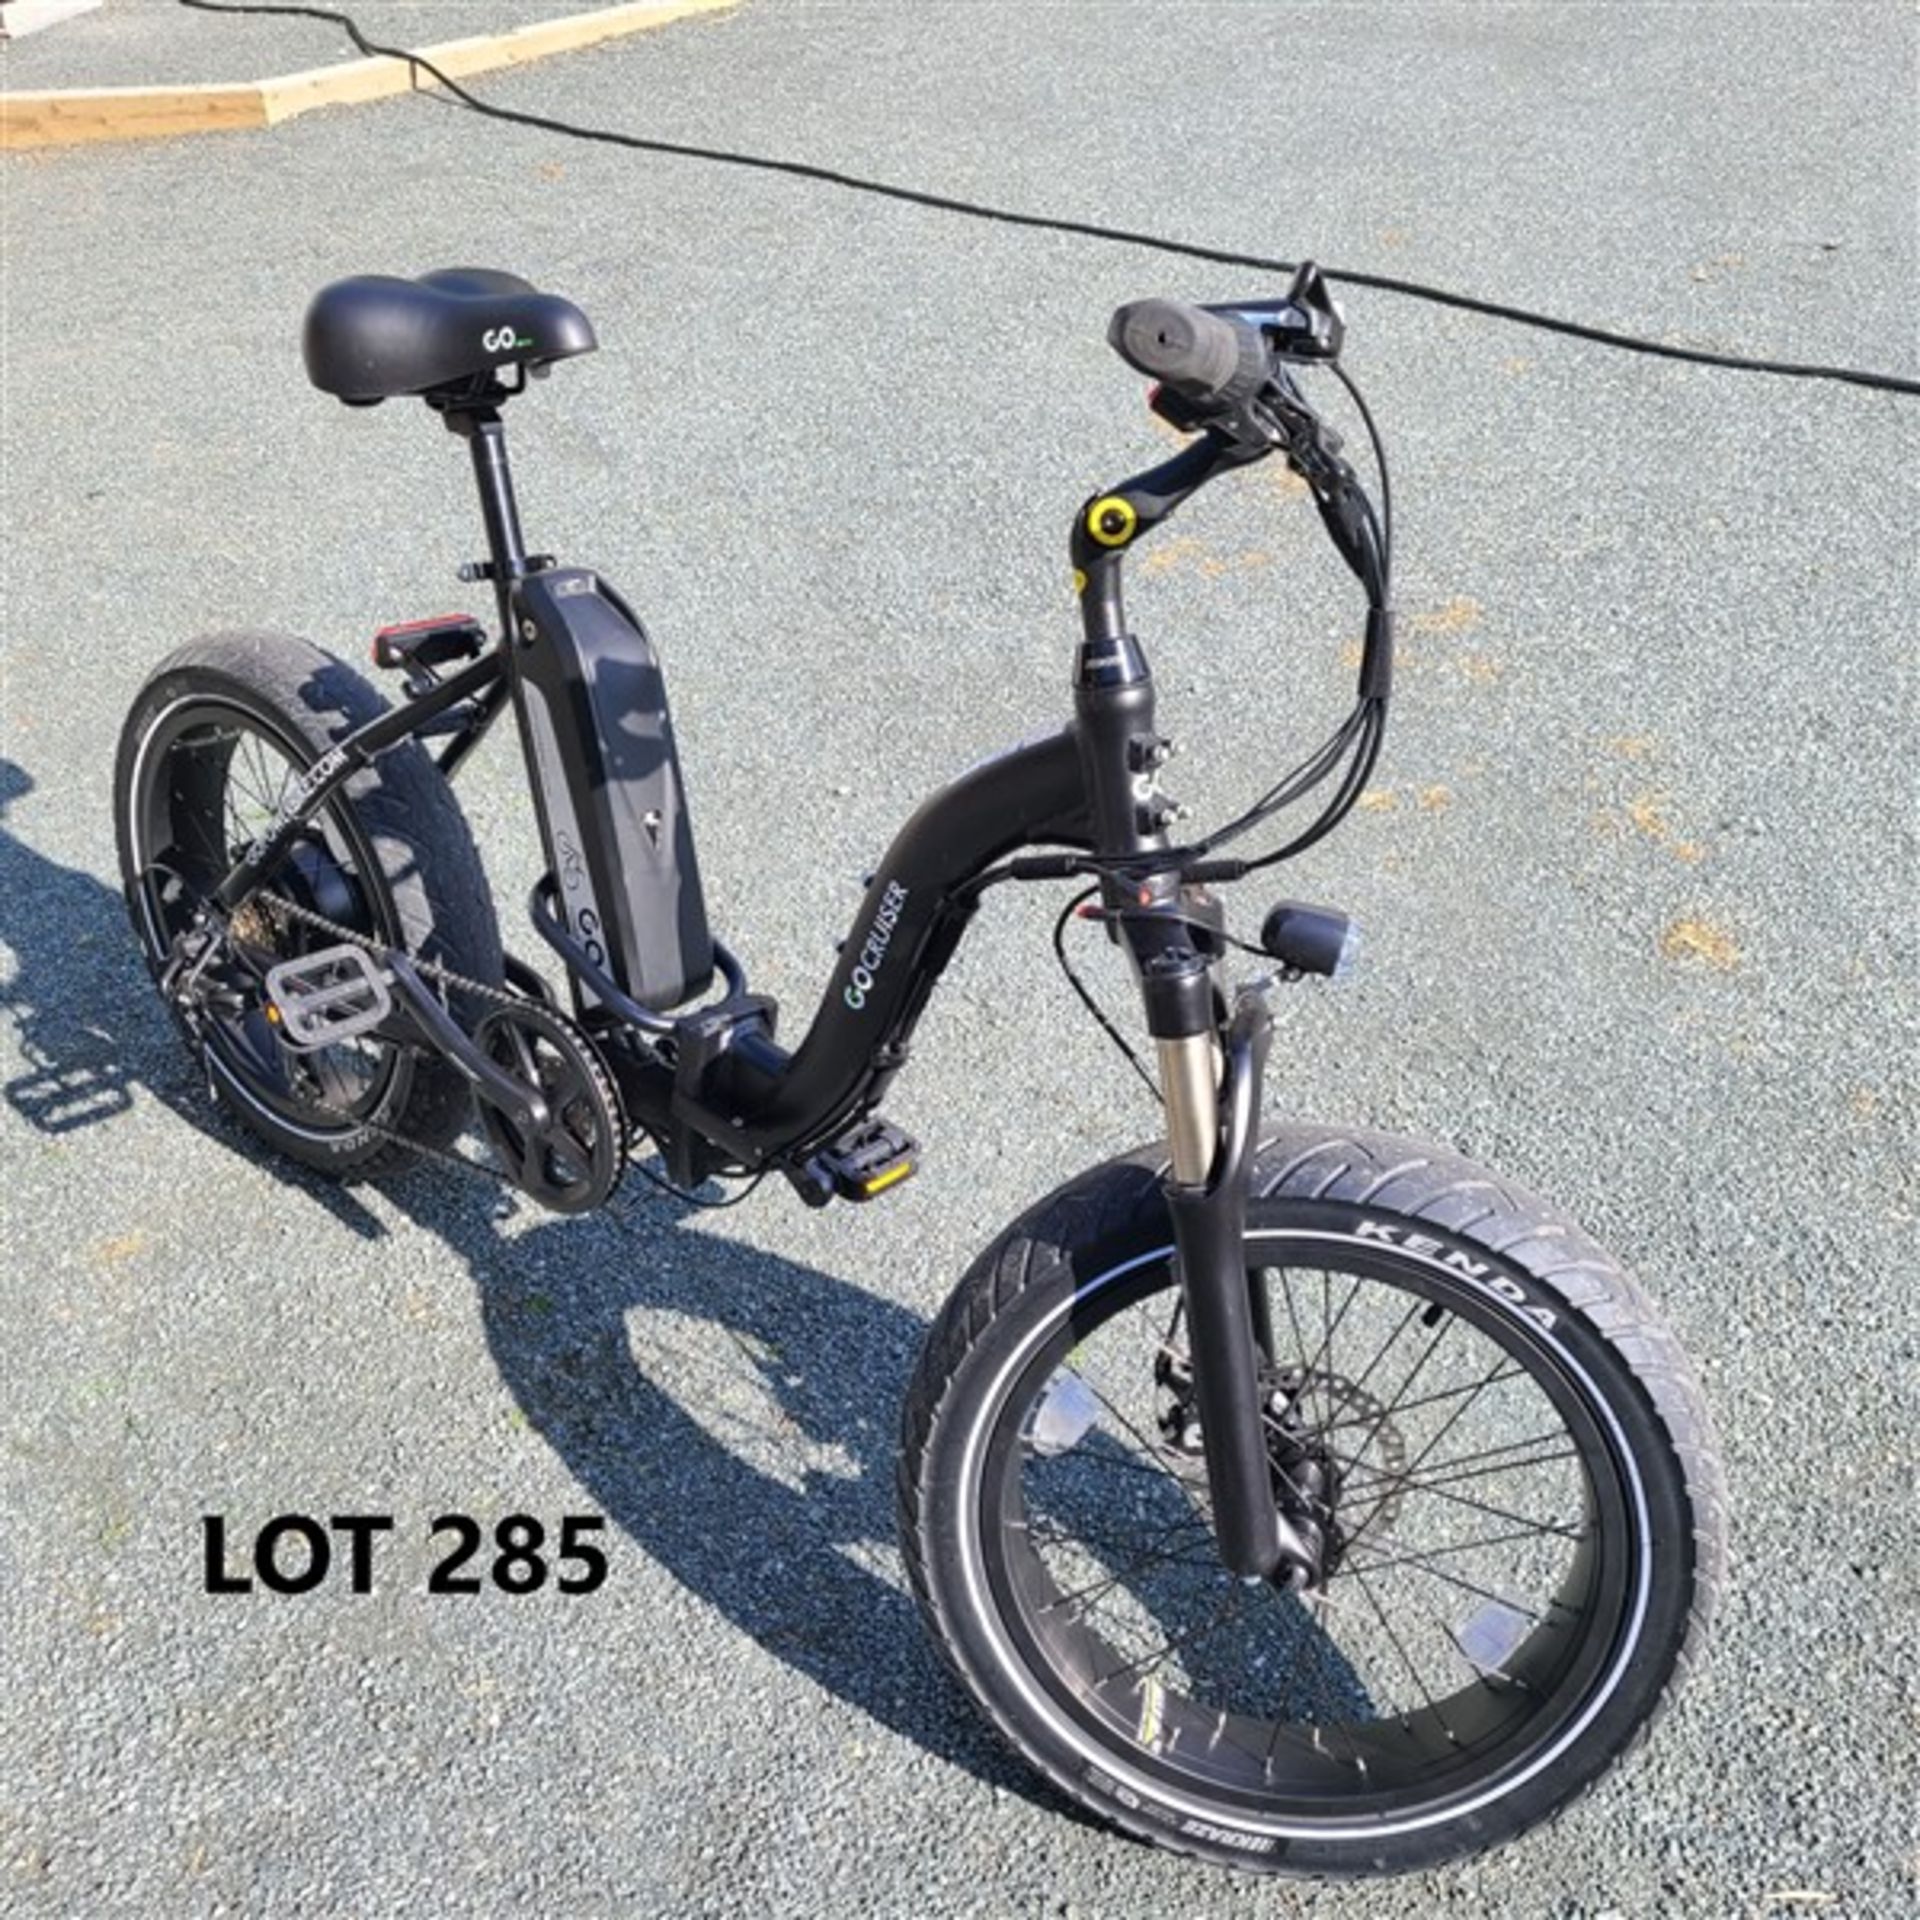 GO CRUISER ELEC. BIKE/FOLDING - AS NEW, COMPLETE WITH MANUALS & CHARGERS. COST TODAY $1499 US DOLLAR